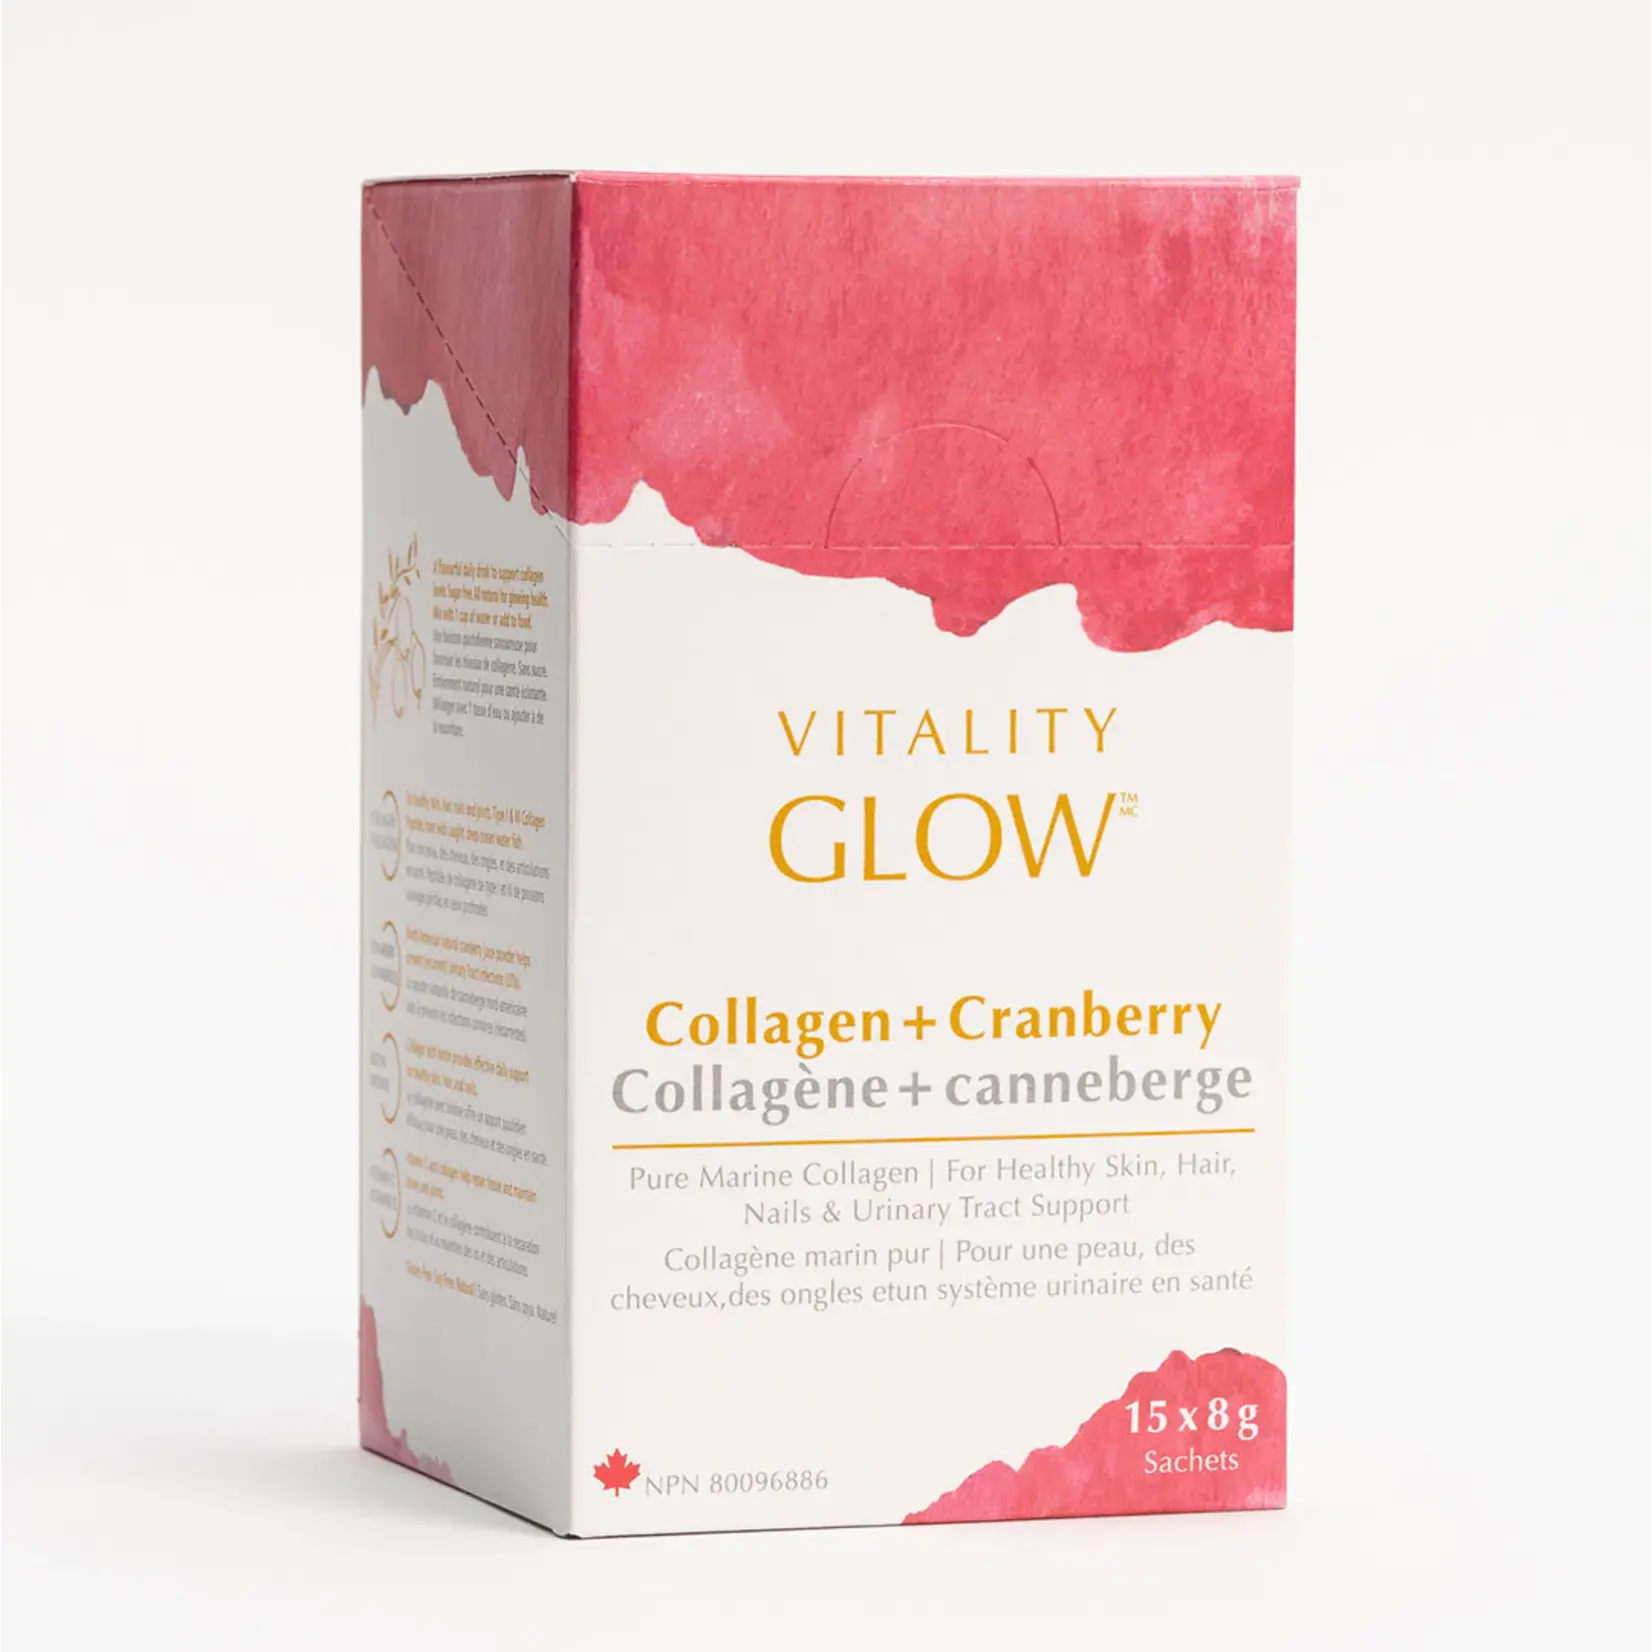 Vitality GLOW - Collagen + Cranberry - 200g